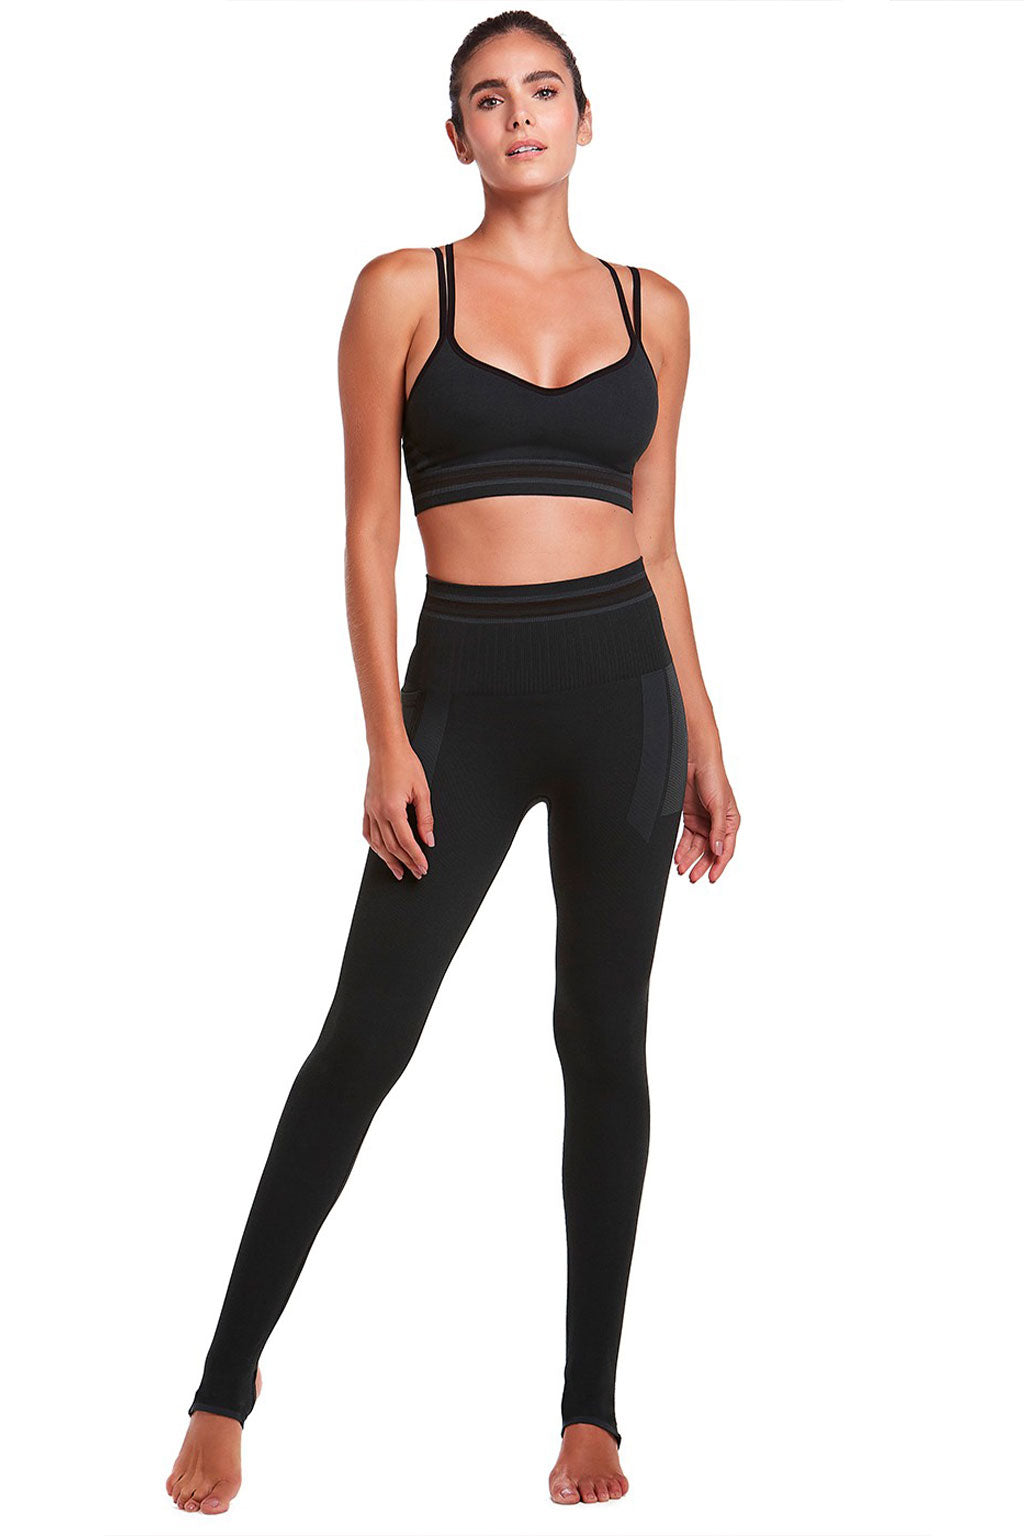 BASIC Top Fusion style Sport Bra with Removable Bulge